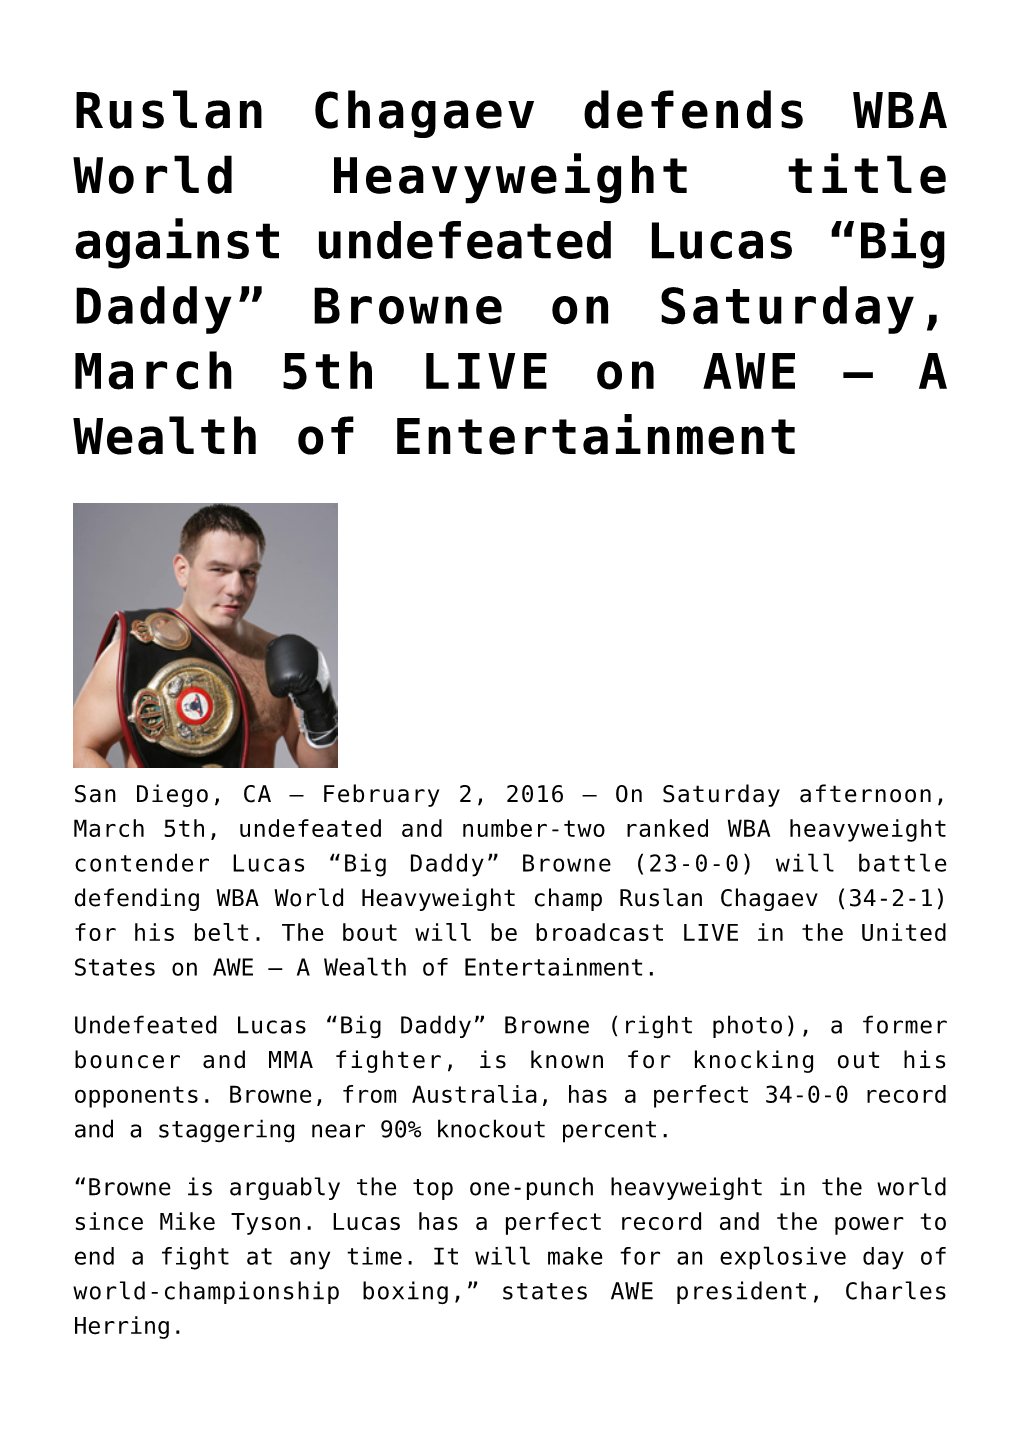 Ruslan Chagaev Defends WBA World Heavyweight Title Against Undefeated Lucas “Big Daddy” Browne on Saturday, March 5Th LIVE on AWE – a Wealth of Entertainment